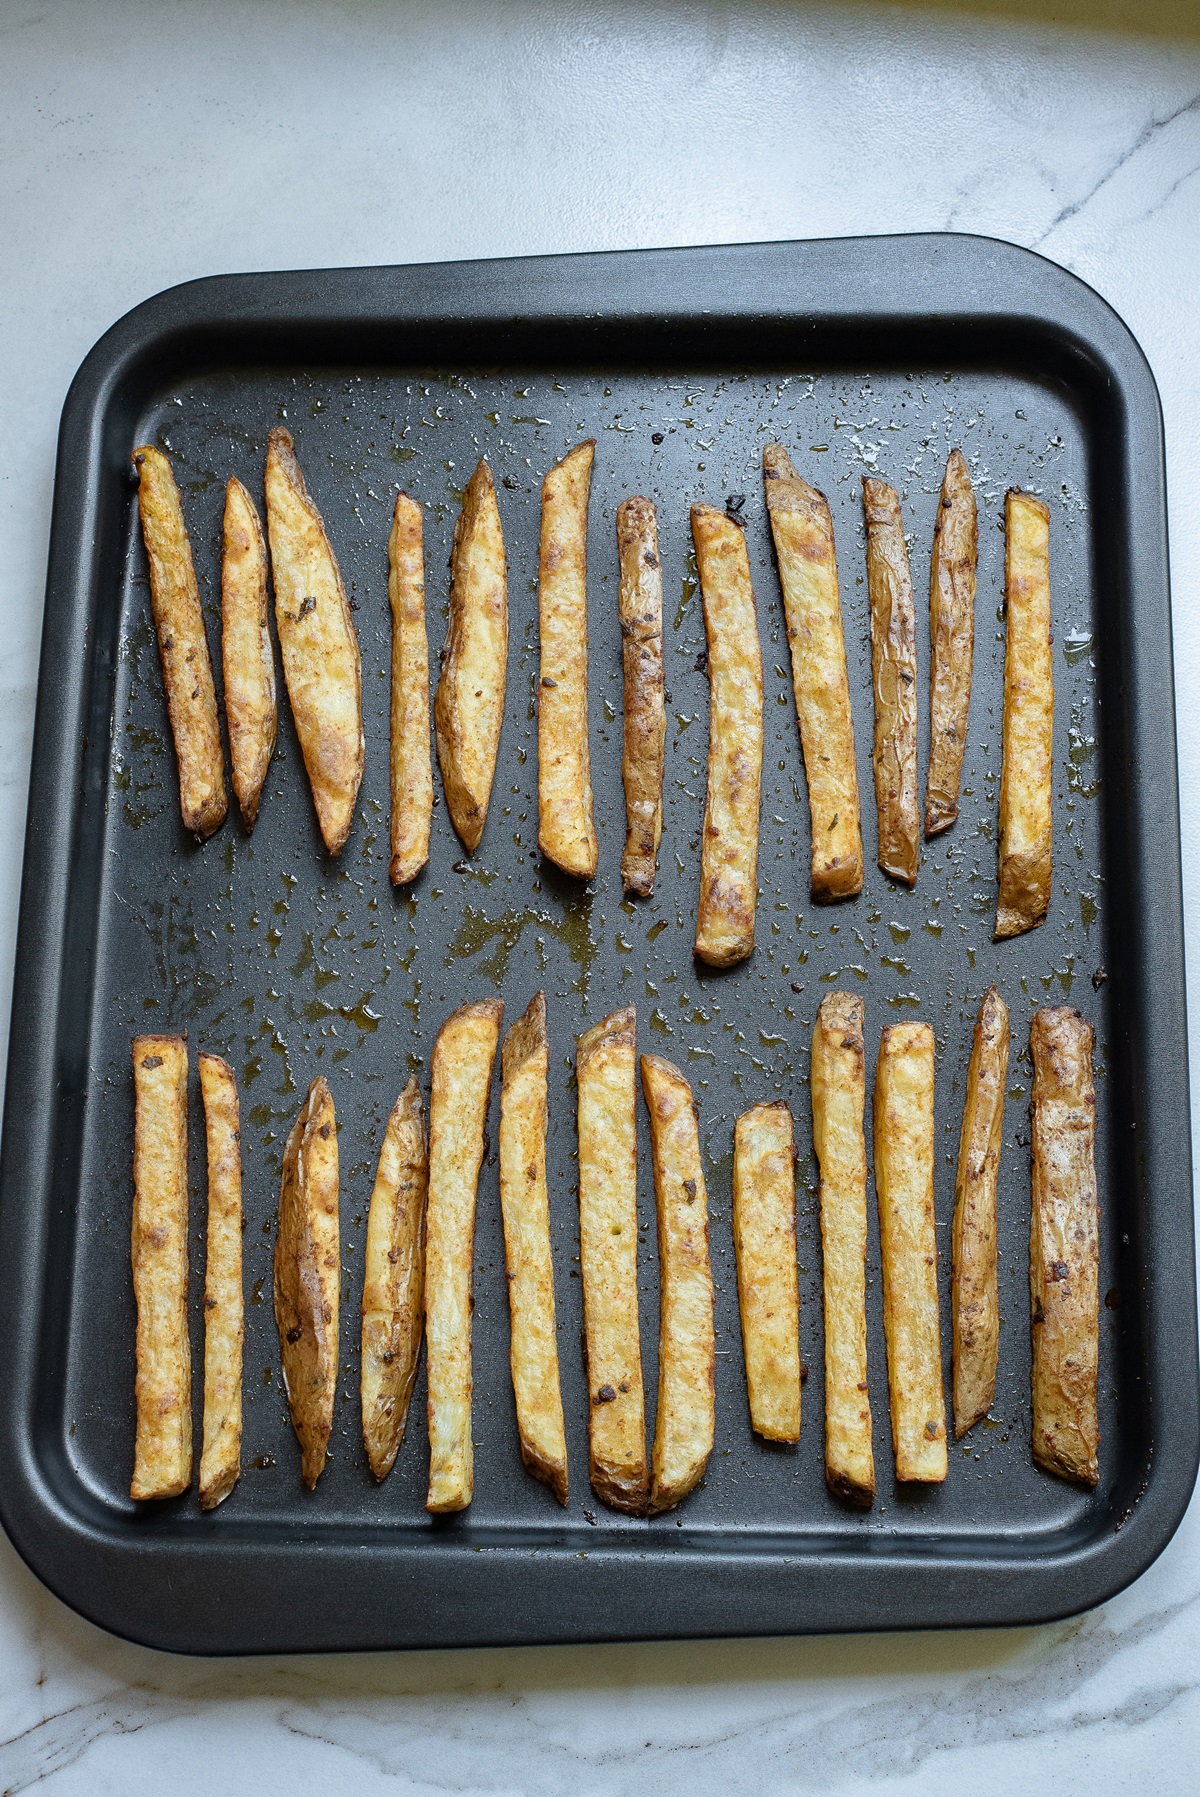 Sliced potatoes that have been baked on a baking tray.